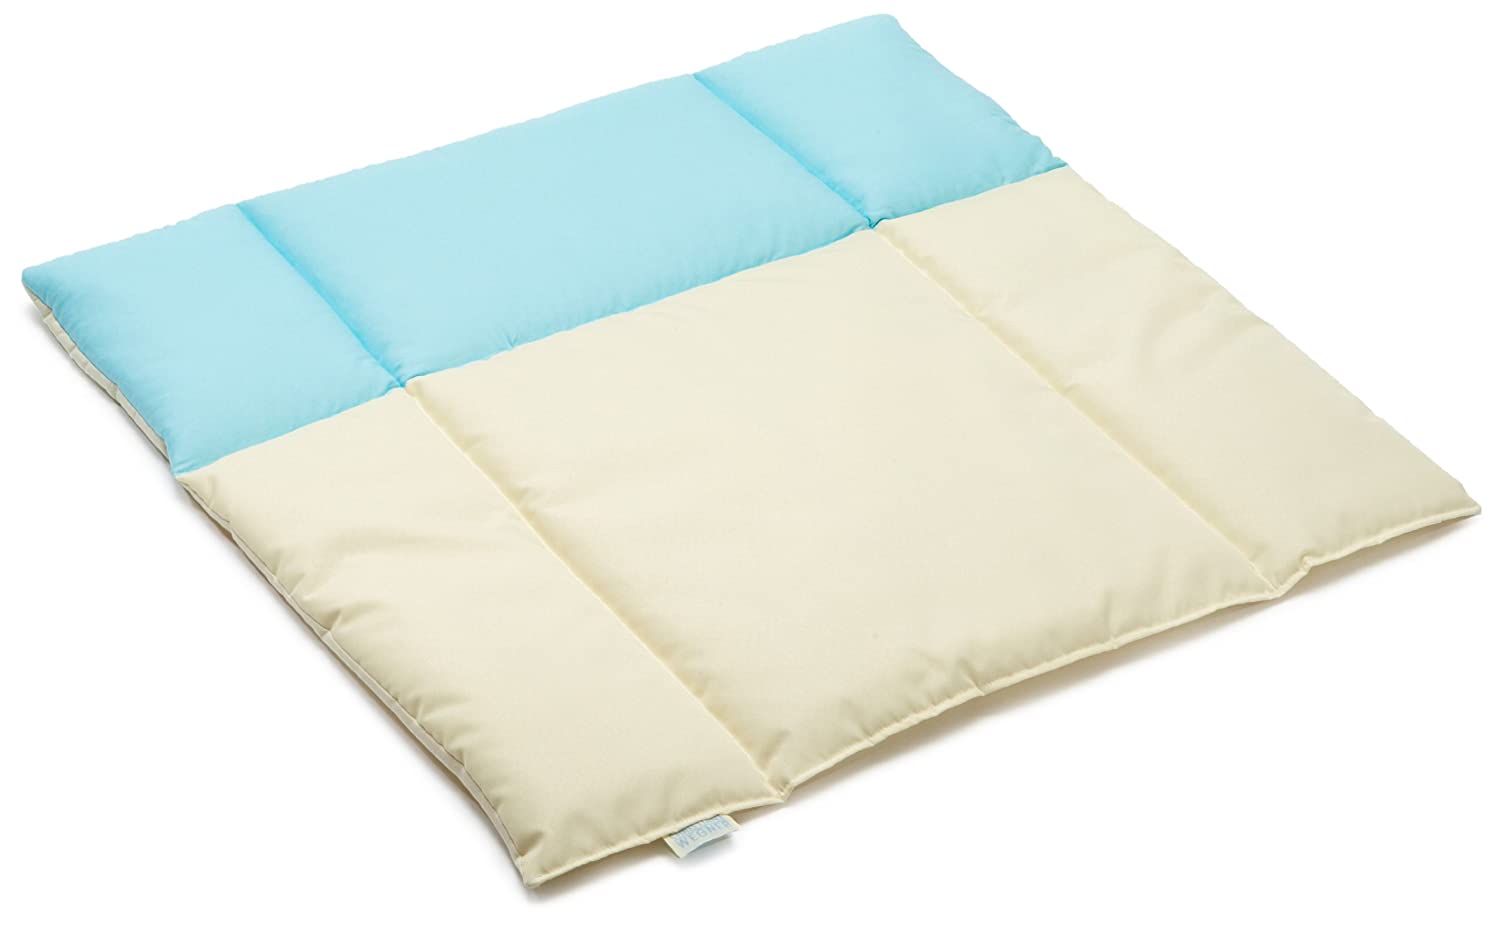 Christiane Wegner Bennie 0331 01- 102 Changing Mat PE Fabric Washable and Wipeable Tear-Resistant PVC-Free 80 x 75 cm